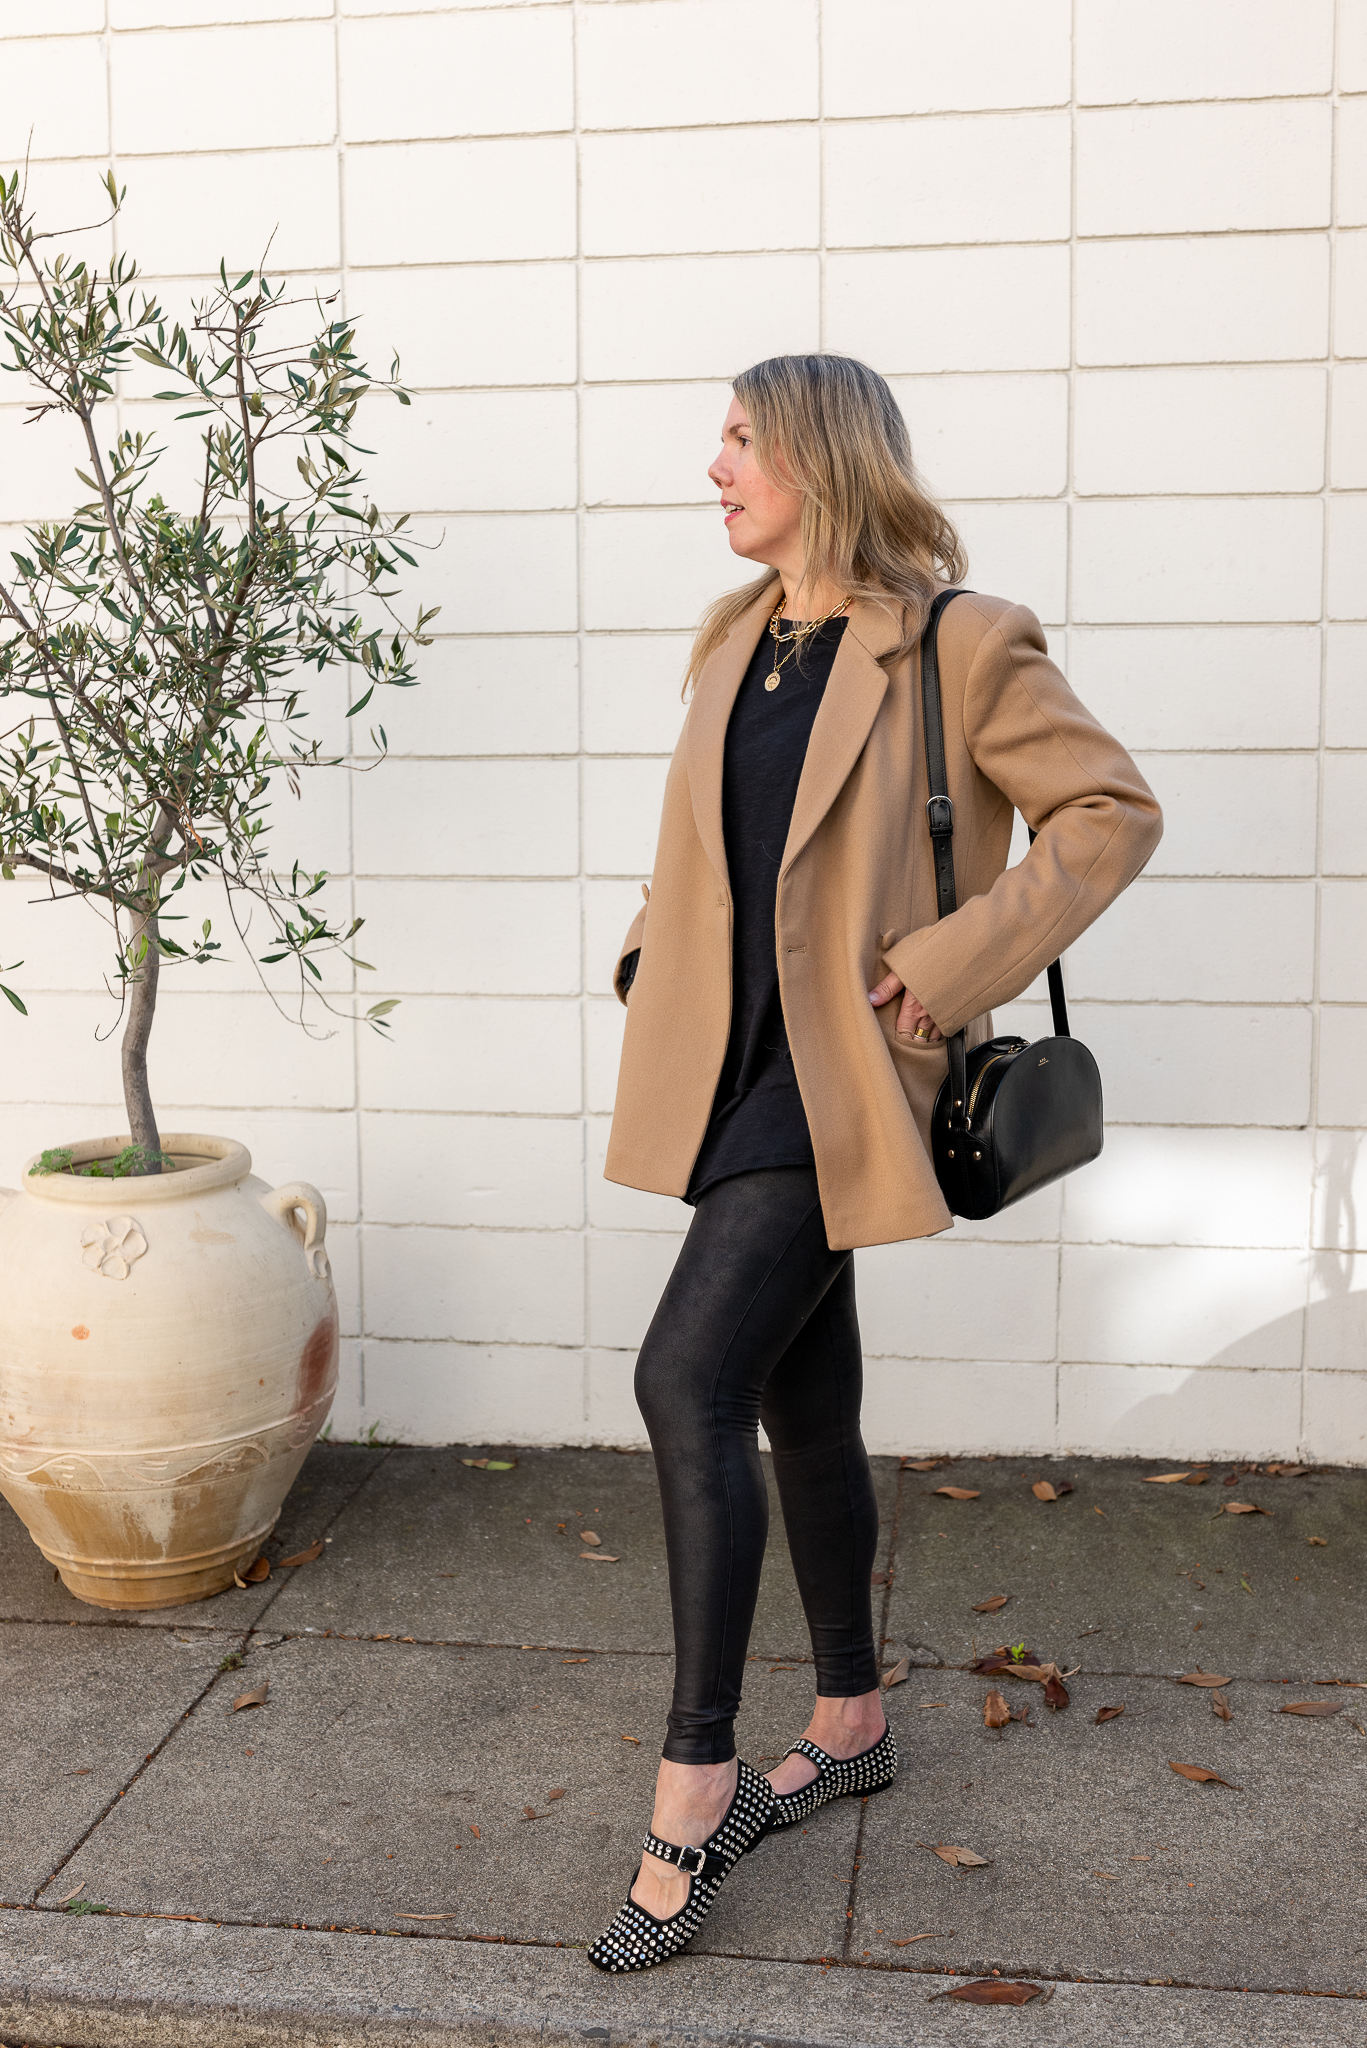 Spanx Faux Leather Leggings : A Honest Review + Dupes